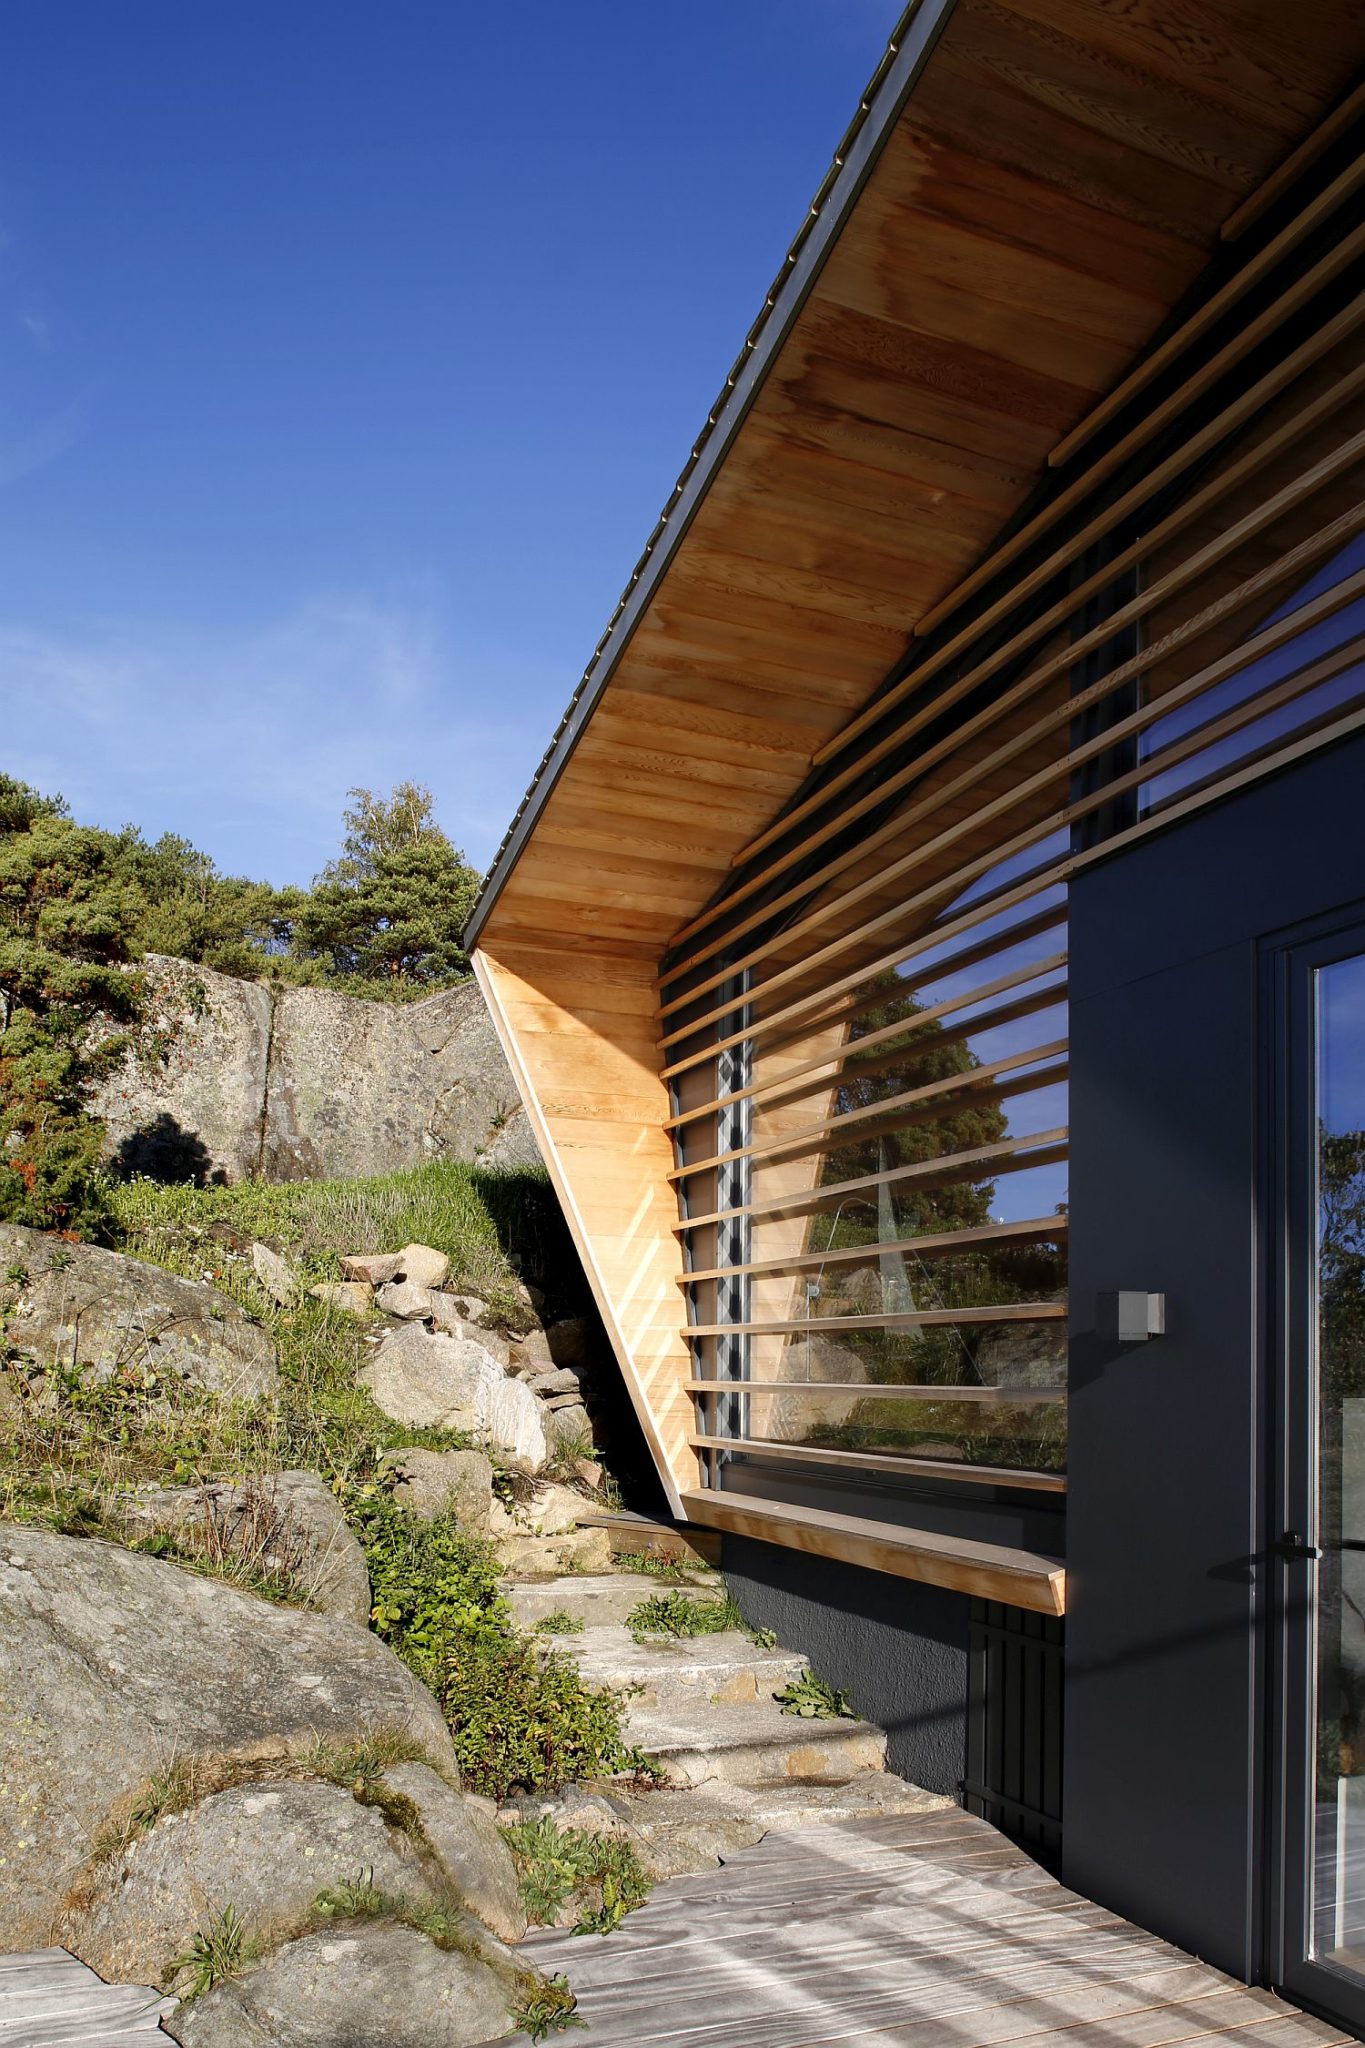 Timber slats for the windows offer protection along with ushering in filtered sunlight